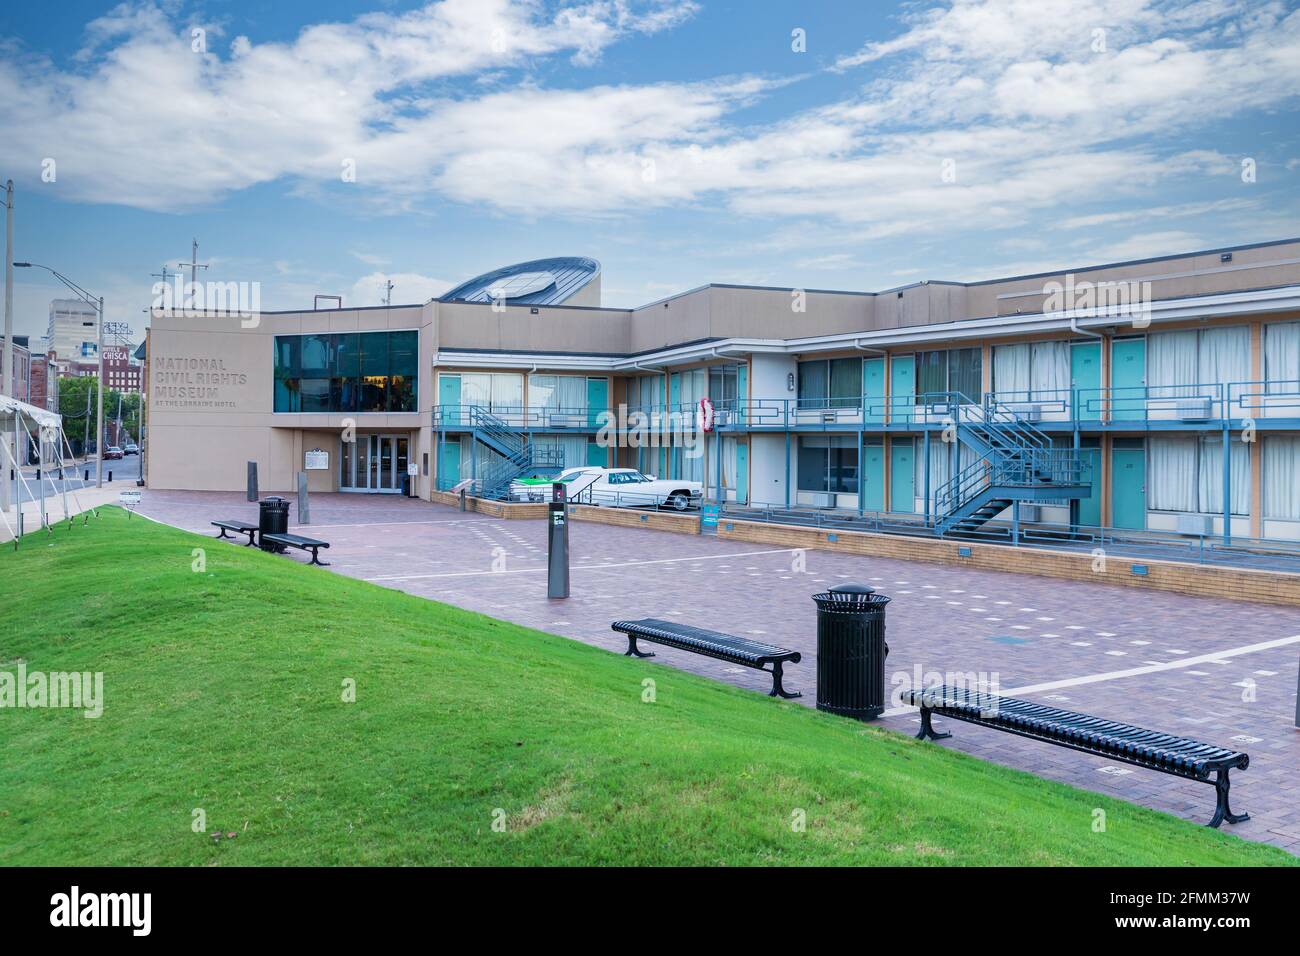 Memphis, TN / USA - September 3, 2020: The National Civil Rights Museum at the Lorraine Motel in Memphis, TN where Martin Luther King, Jr was assassin Stock Photo